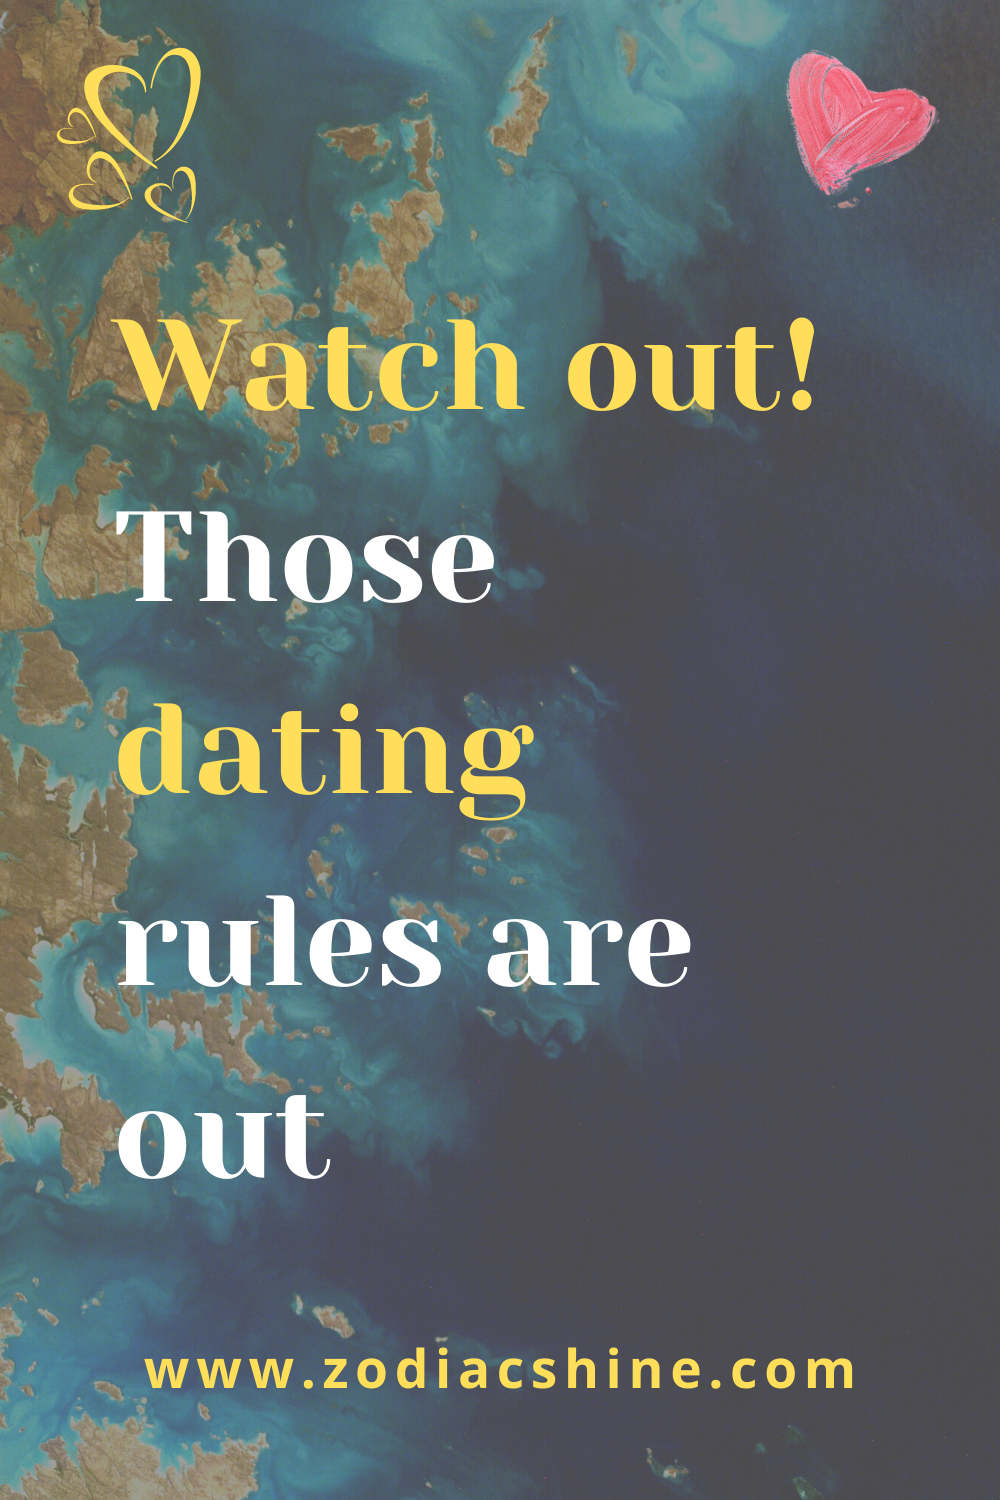 Watch out! Those dating rules are out